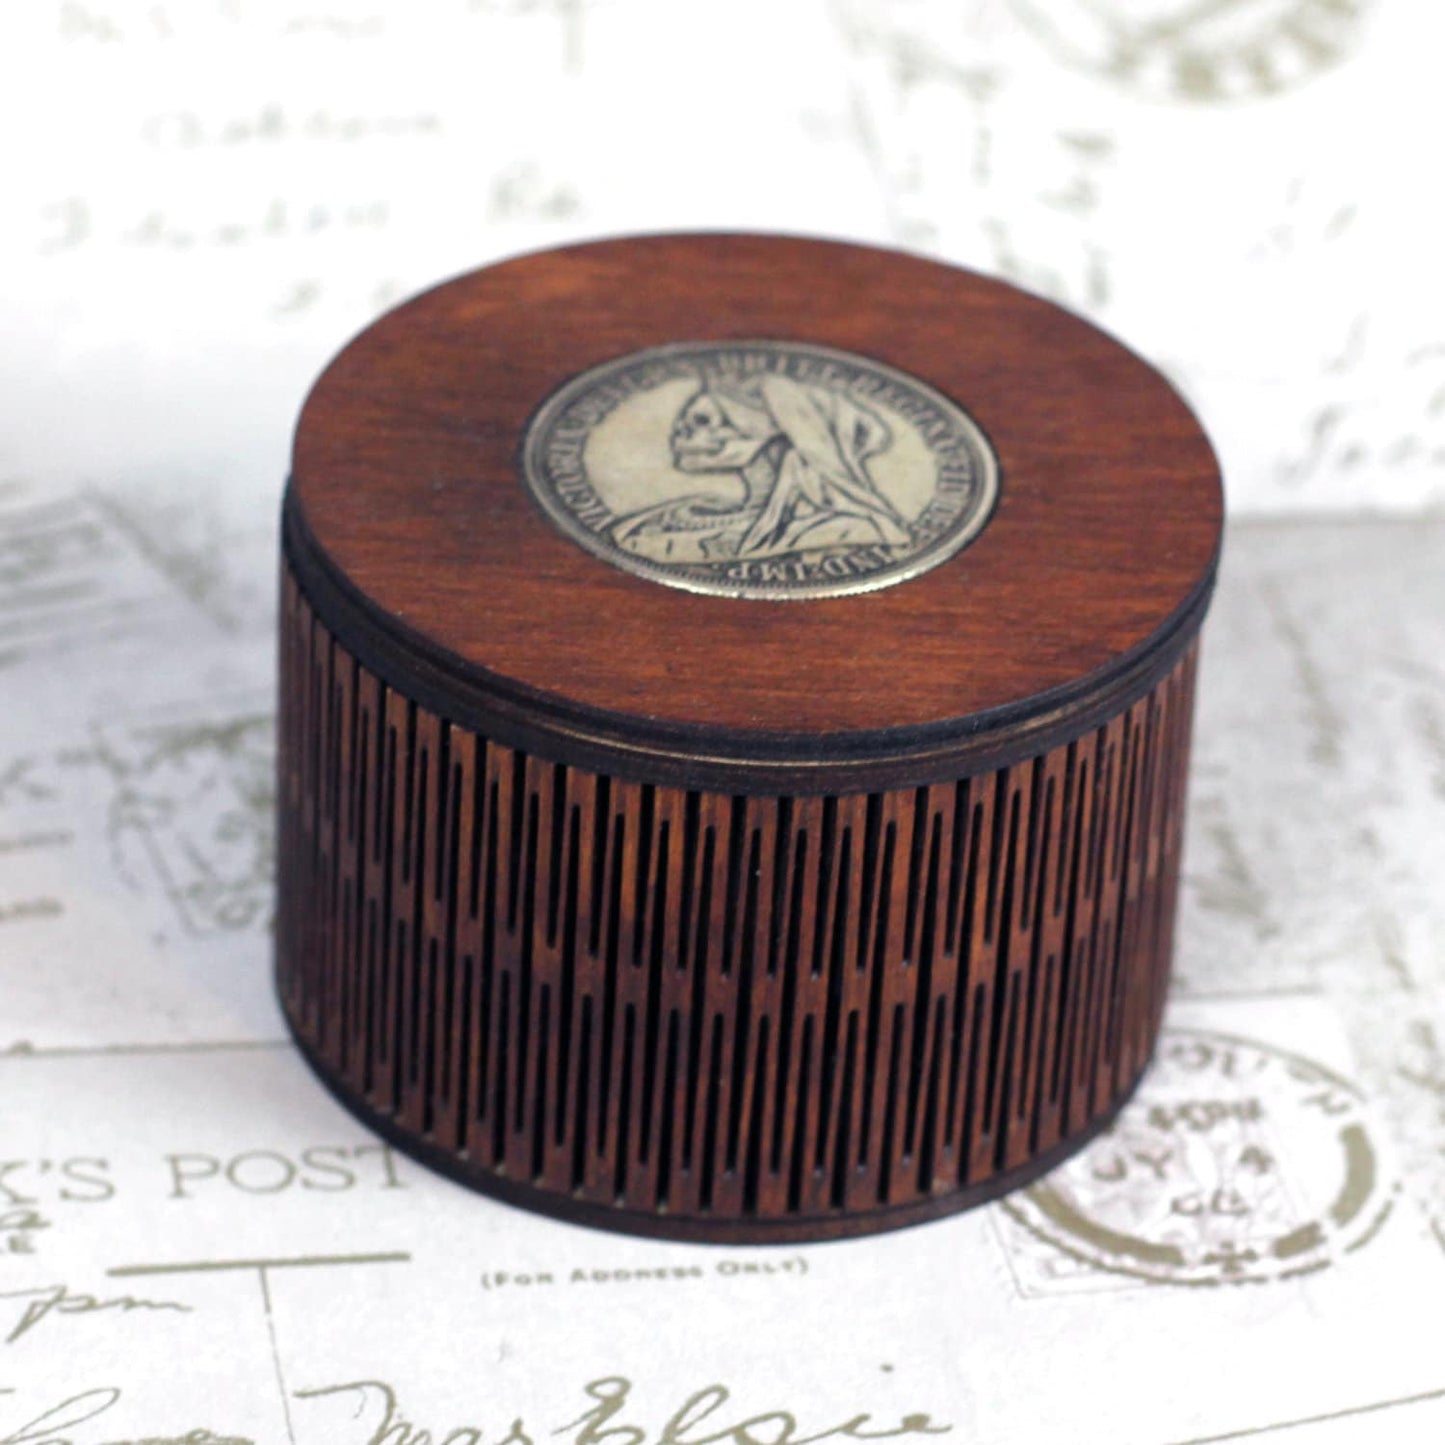 Skull Coin Design Personalised wooden keepsake box with living hinge side, a gothic jewellery box, Victorian style custom wood trinket